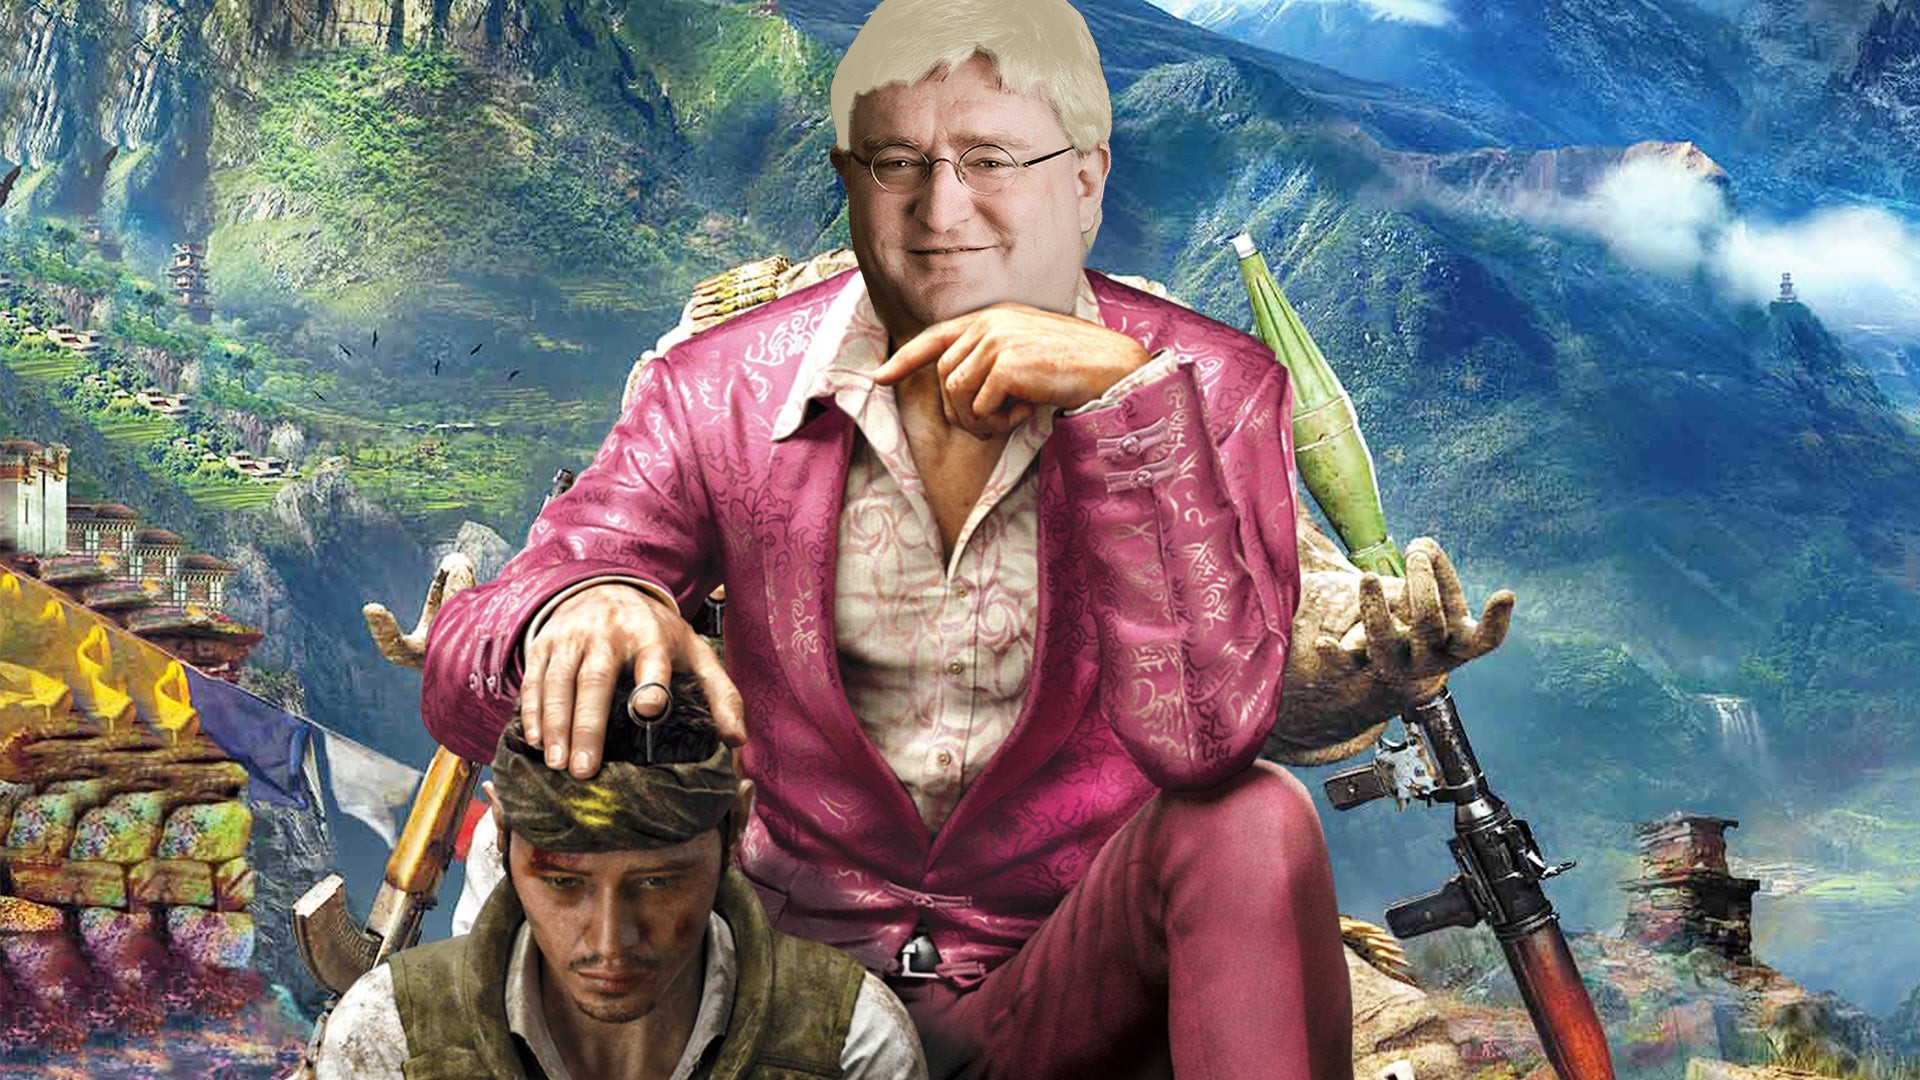 Pagan Min from Far Cry 4 sitting in a chair with the face of Gabe Newell